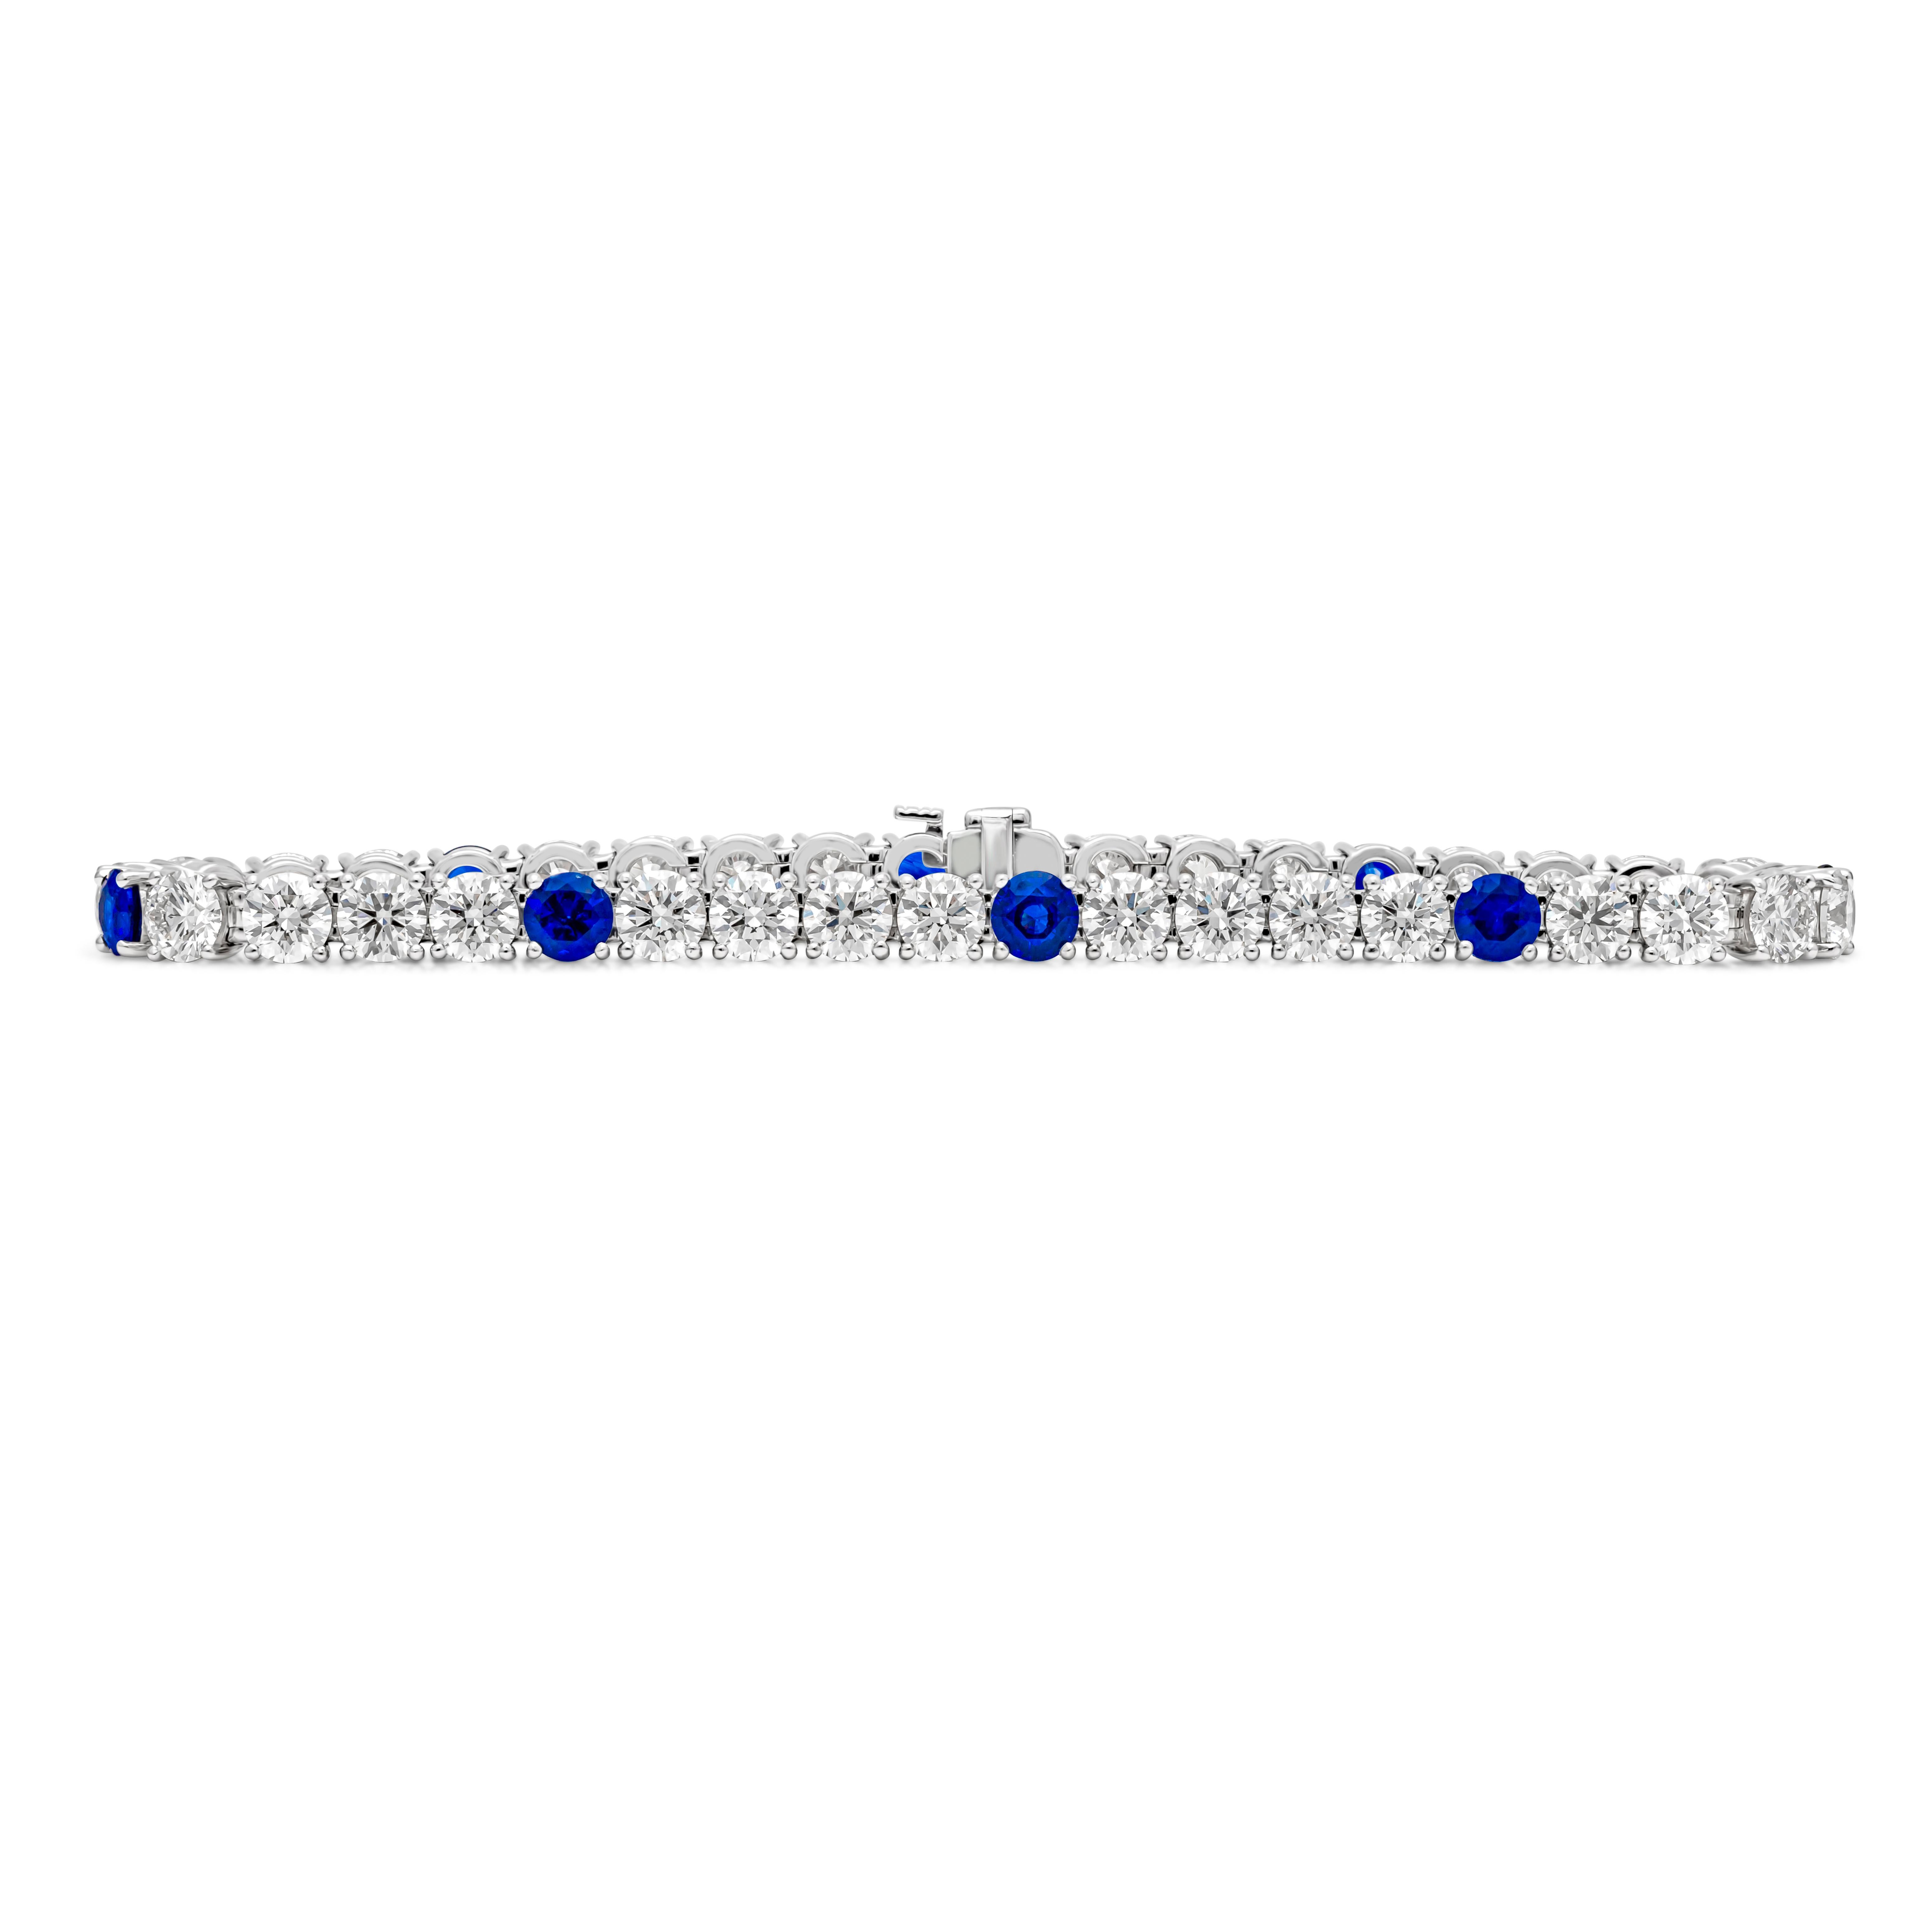 An exquisite and classy tennis bracelet, showcasing 32 round brilliant cut diamonds weighing 13.00 carats total with G color and VS clarity, set on a classic four prong basket setting finely made in 18K white gold. Elegantly spaced by 8 color-rich